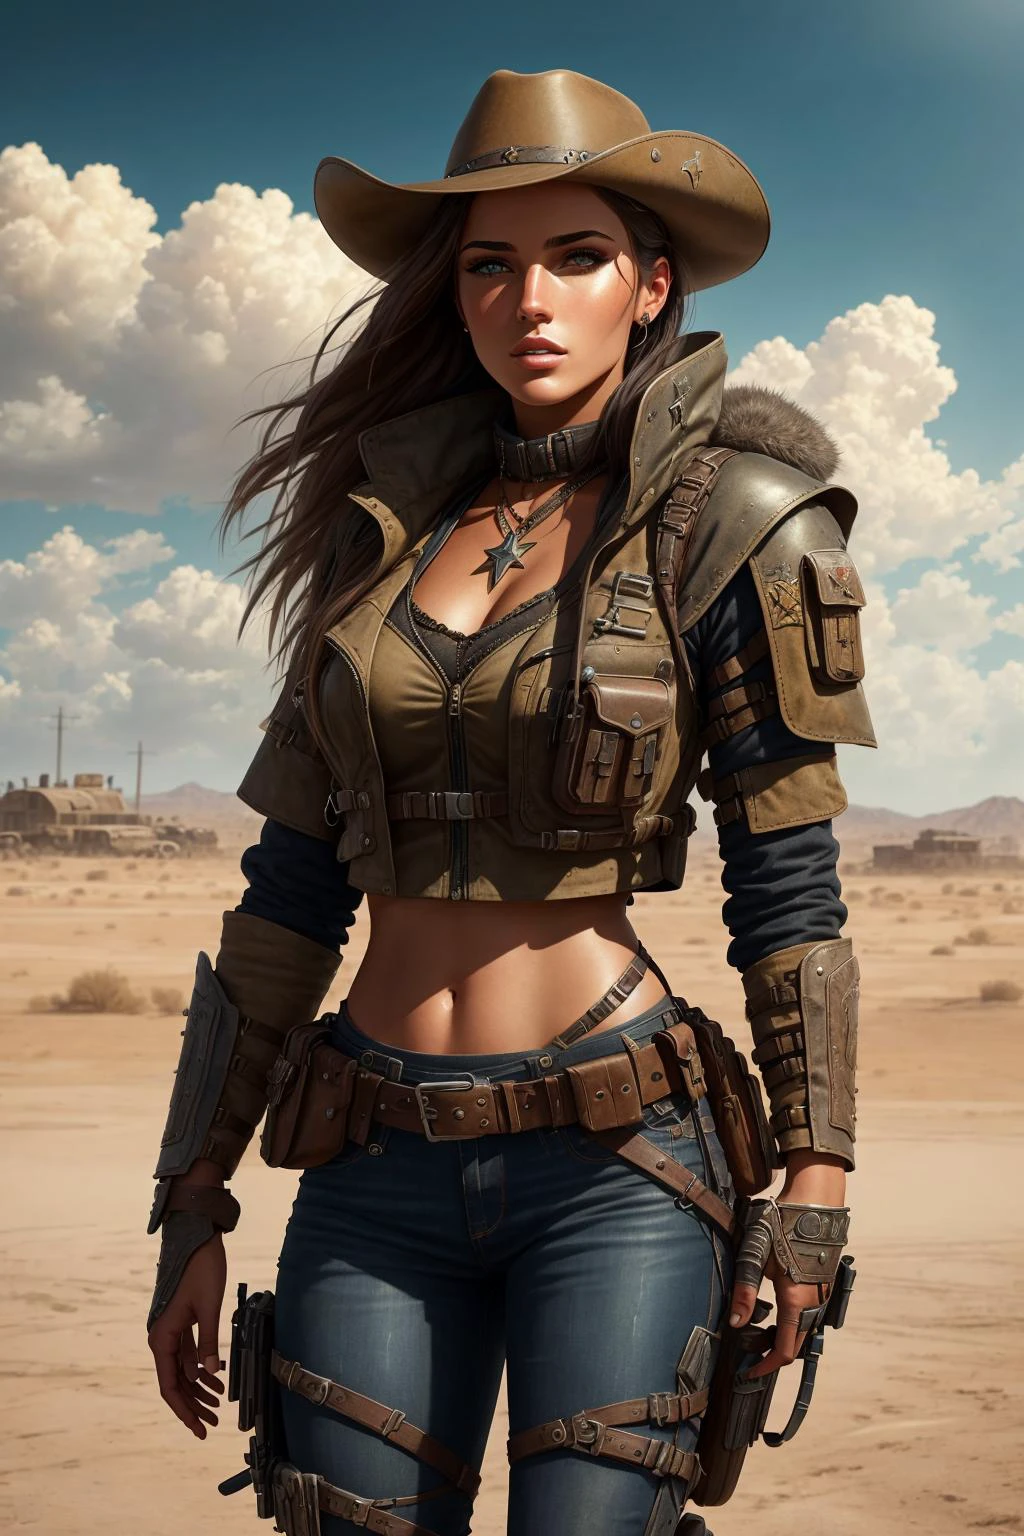 Create a cinematic, filmic image ((best quality)), ((masterpiece)), ((realistic)) of [post nuclear town] in [fallout style], with [detailed linework], [dynamic shading], and [rich colors]. Show [young caucasian woman] [Desert Ranger] named [AnjelikaV2:1.5] and her [full body], with [expressive facial features] and [fluid body movements], and close attention paid to [costume design] and [background details]. The art style should capture the [post-apocalyptic setting] of the image.
Create an [ultra-realistic], [high-resolution] image of [soldier] [mercenary] [exploring] [american] [desolated city] before the [storm], with the [hot summer sun] still shining brightly in the sky, but in the distance, the sky is a [dark and foreboding shade of blue], hinting at an impending storm. [Tumbleweeds] rolling in the distance.
Her face is covered in [dust] with windswept hair cascading [loosely]. Her eyes with [black eyeliner] and [smokey eye shadow] have long, full eyelashes that add to her feminine charm. She wears a [bandolier], [uzipped] [rugged black leather armor] showing her [cleavage] and [tactical vest:1.2], [old jeans] accentuating her [slim body] and [black wide-brimmed cowboy hat] with metal [texas ranger star], [knee pads] and [short leather boots] that provide both style and function and [holding weapon], [holding gun], [assault rifle:1.2].
Aim for a [photorealistic] portrayal that captures the [essence] of her character, with [intricate details] that capture every nuance of her form. The overall mood of the image should be [post nuclear], [post-apocalyptic], with a sense of [melancholy], [loneliness], and [desolation], showing the complete scene with her [full body]  > 